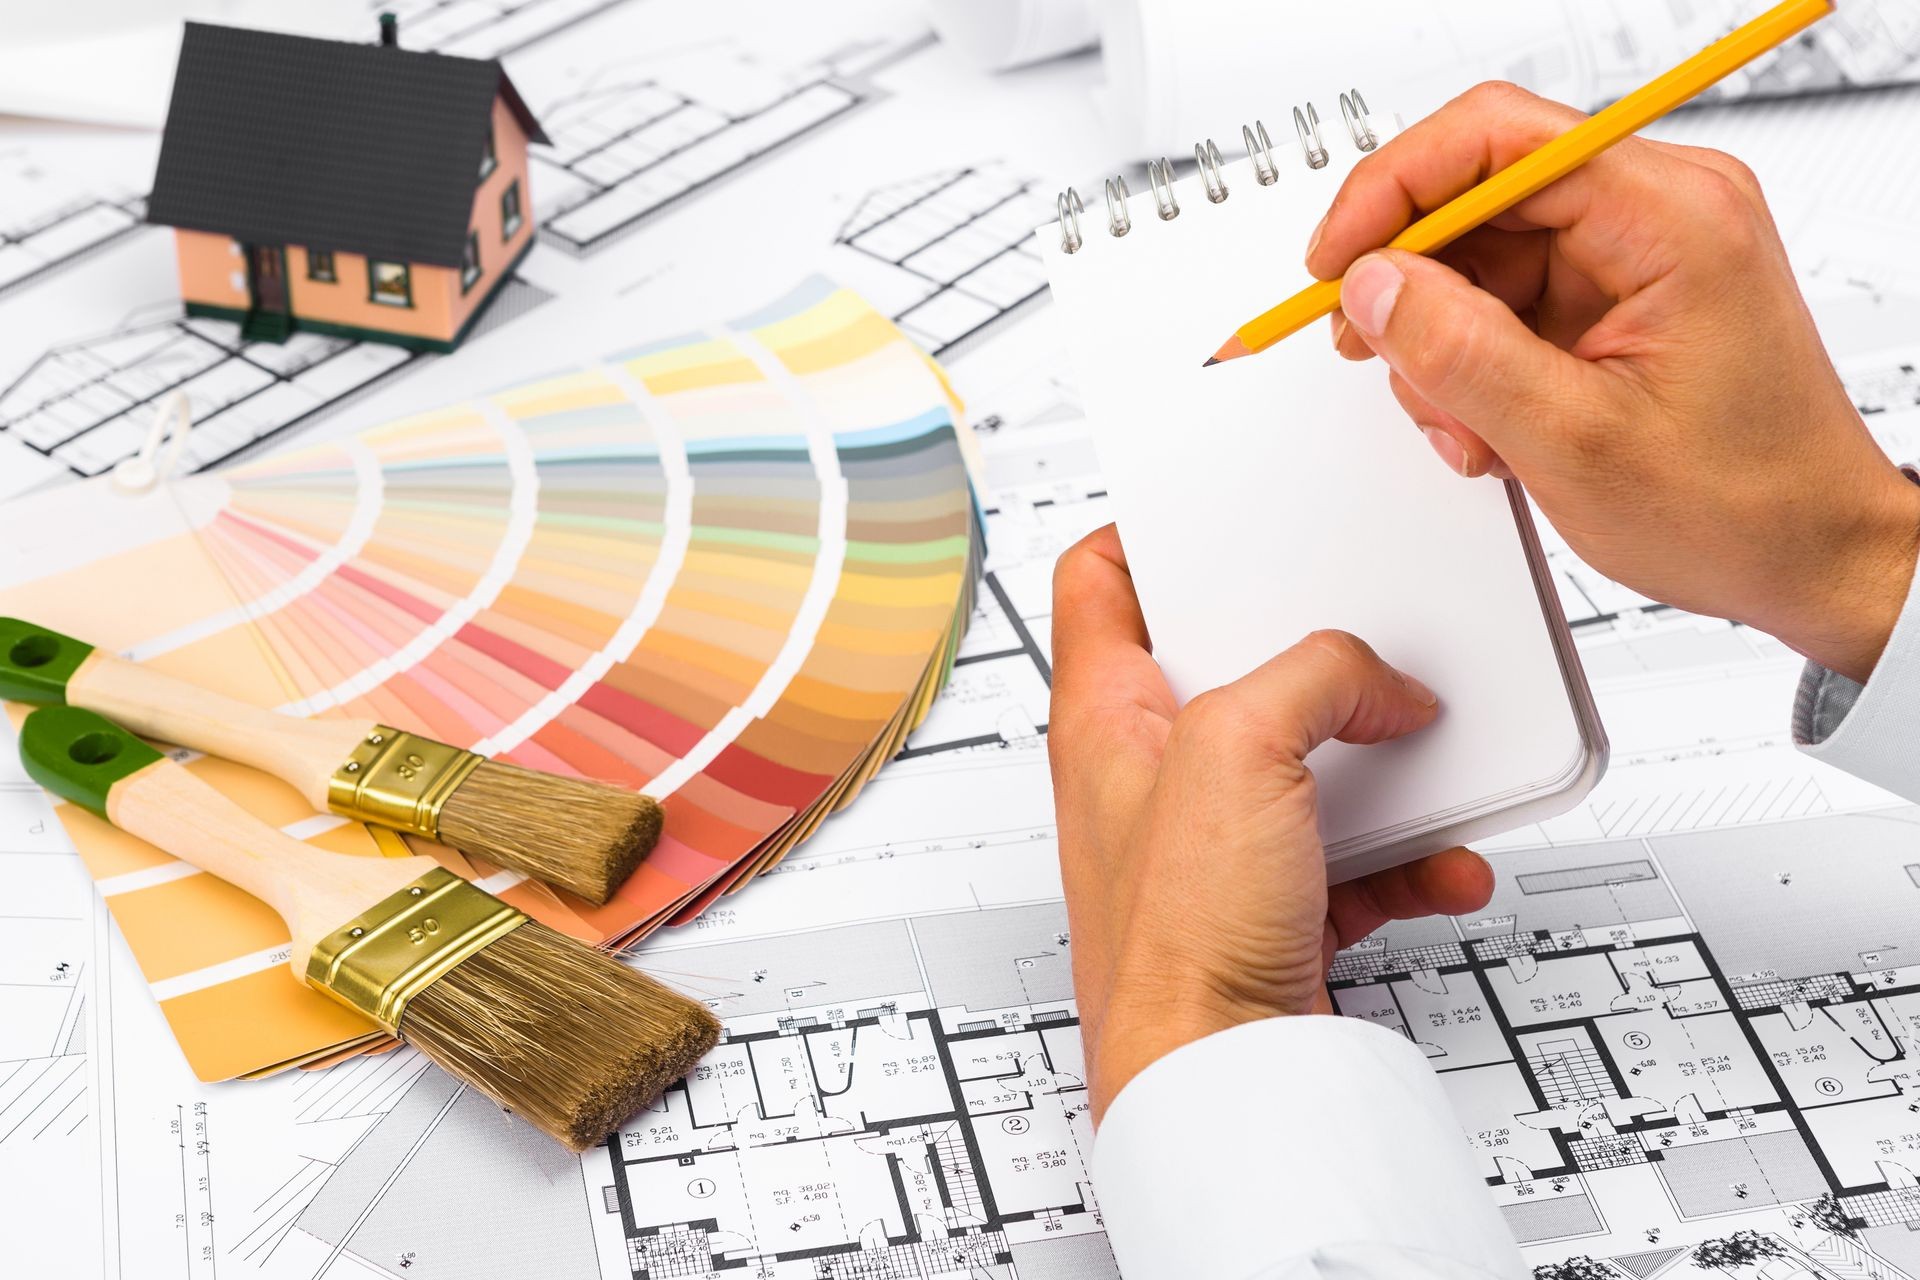 Male Hands writing on notebook; Construction plans with Color Palette and Miniature House on blueprints; Business and Construction Industry Concept